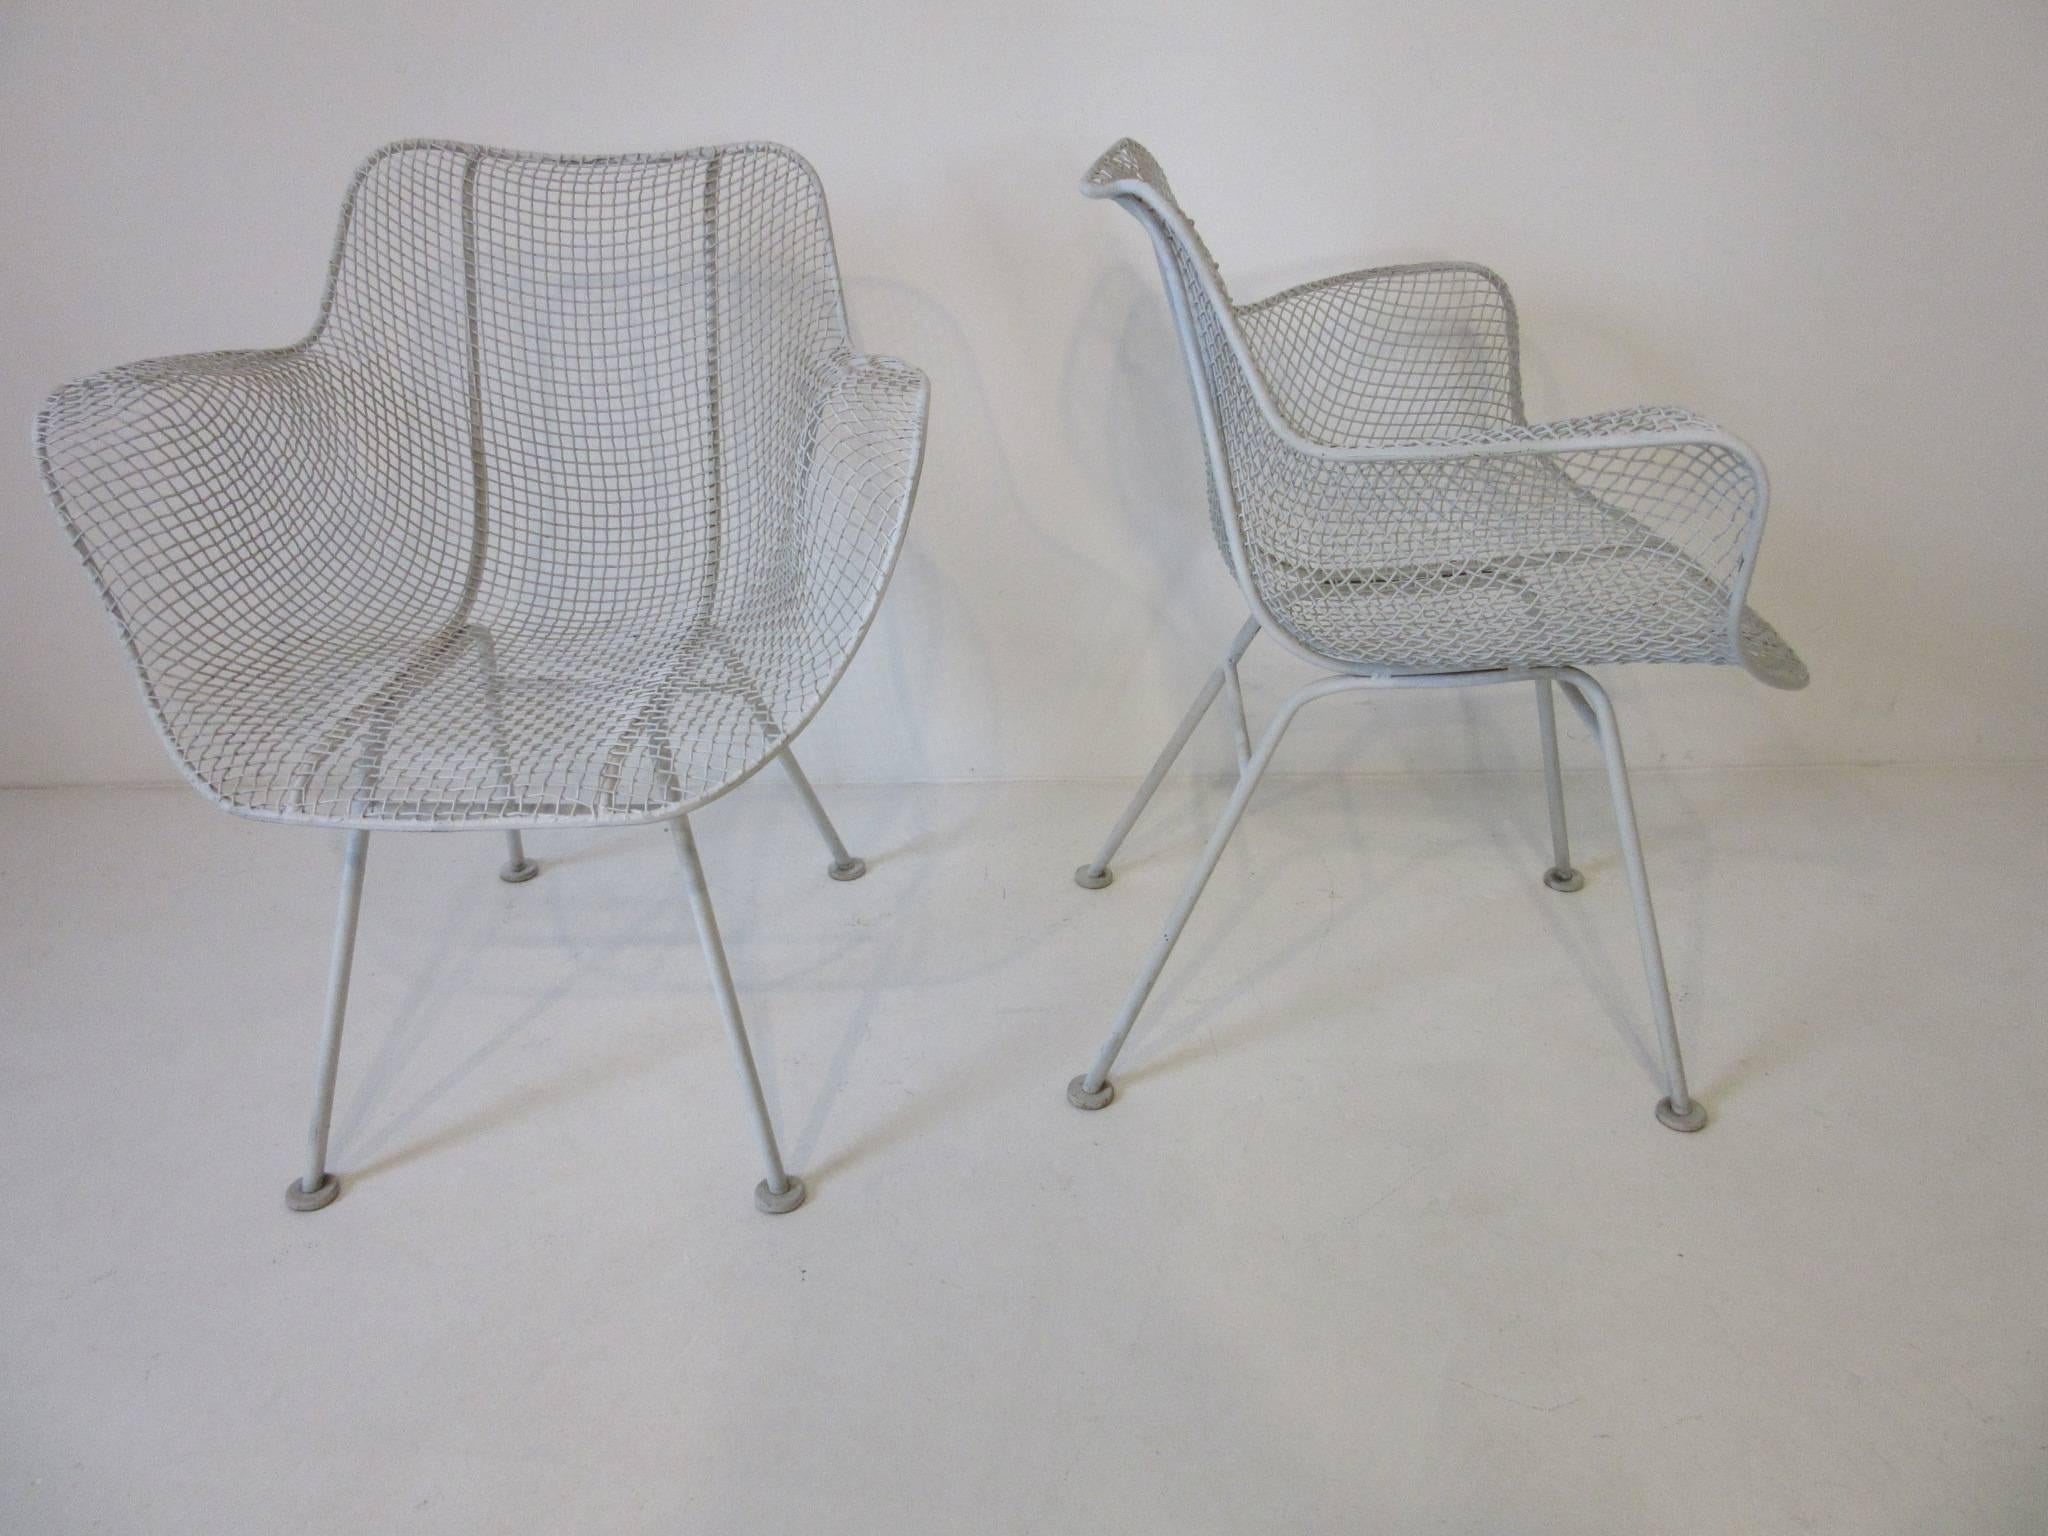 A pair of wire and iron molded and welded Sculptura armchairs in the style of Eames with foot pads and in their original finish. Great for a three seasons room, deck, porch or that cozy garden, manufactured by the Woodard Furniture Company.